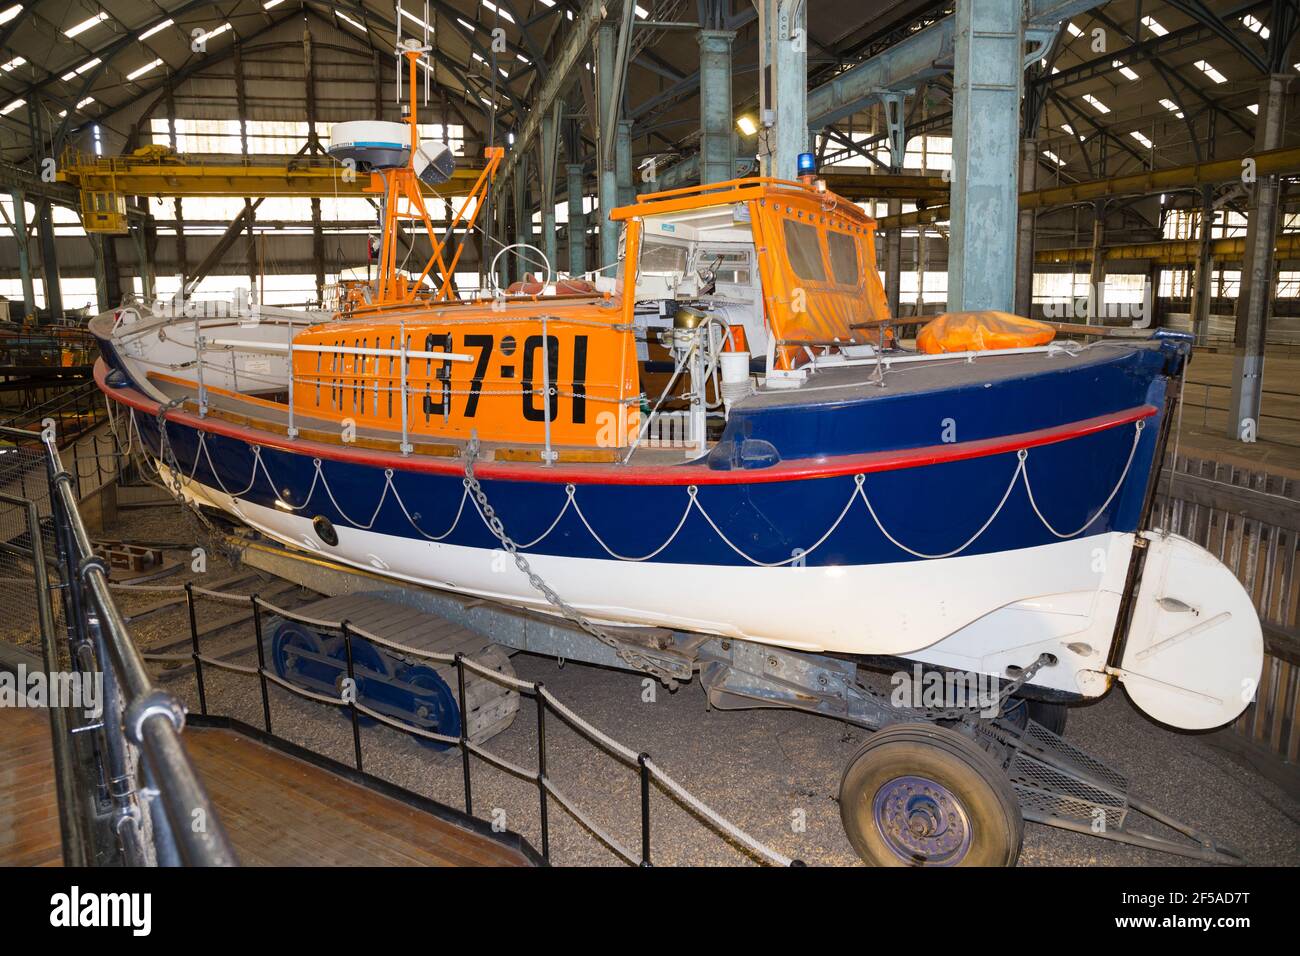 Old vintage historic RNLB Lifeboat 'J.G. Graves of Sheffield' on display at Number Four Boat House / Boathouse Number 4 at Historic Dockyard / Dockyards Chatham in Kent. UK (121) Stock Photo